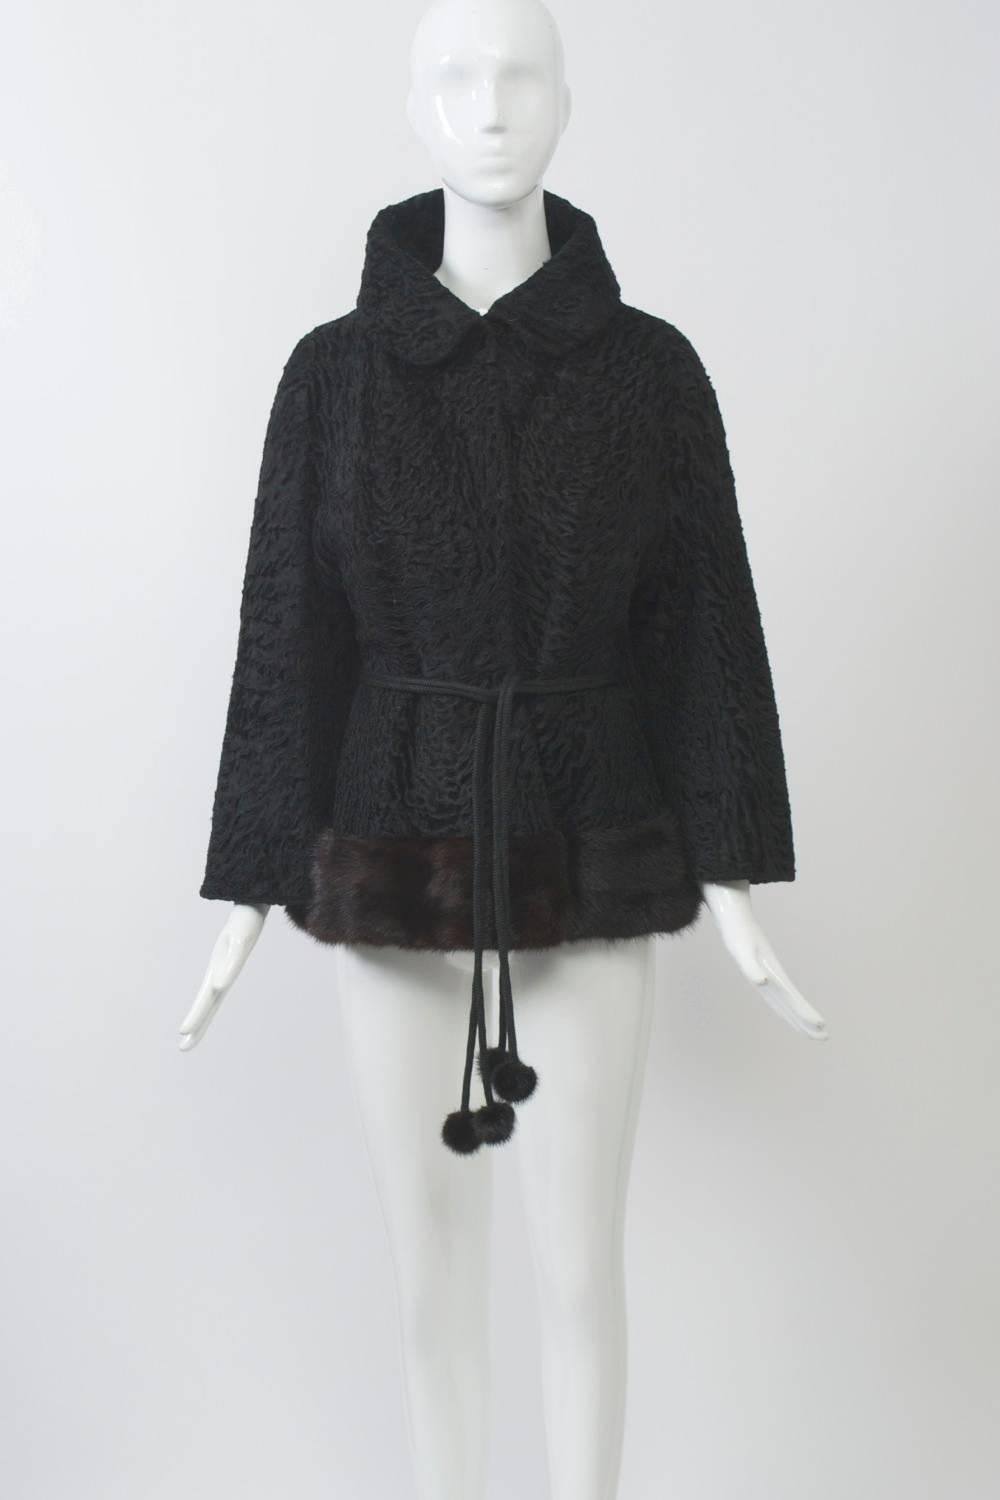 Black broadtail jacket features stand-up collar and deep ranch mink border along hem. A cord belt ending in mink pompoms goes through side slits and cinches the waist in front, leaving the back free. Very nicely and unusually styled. 